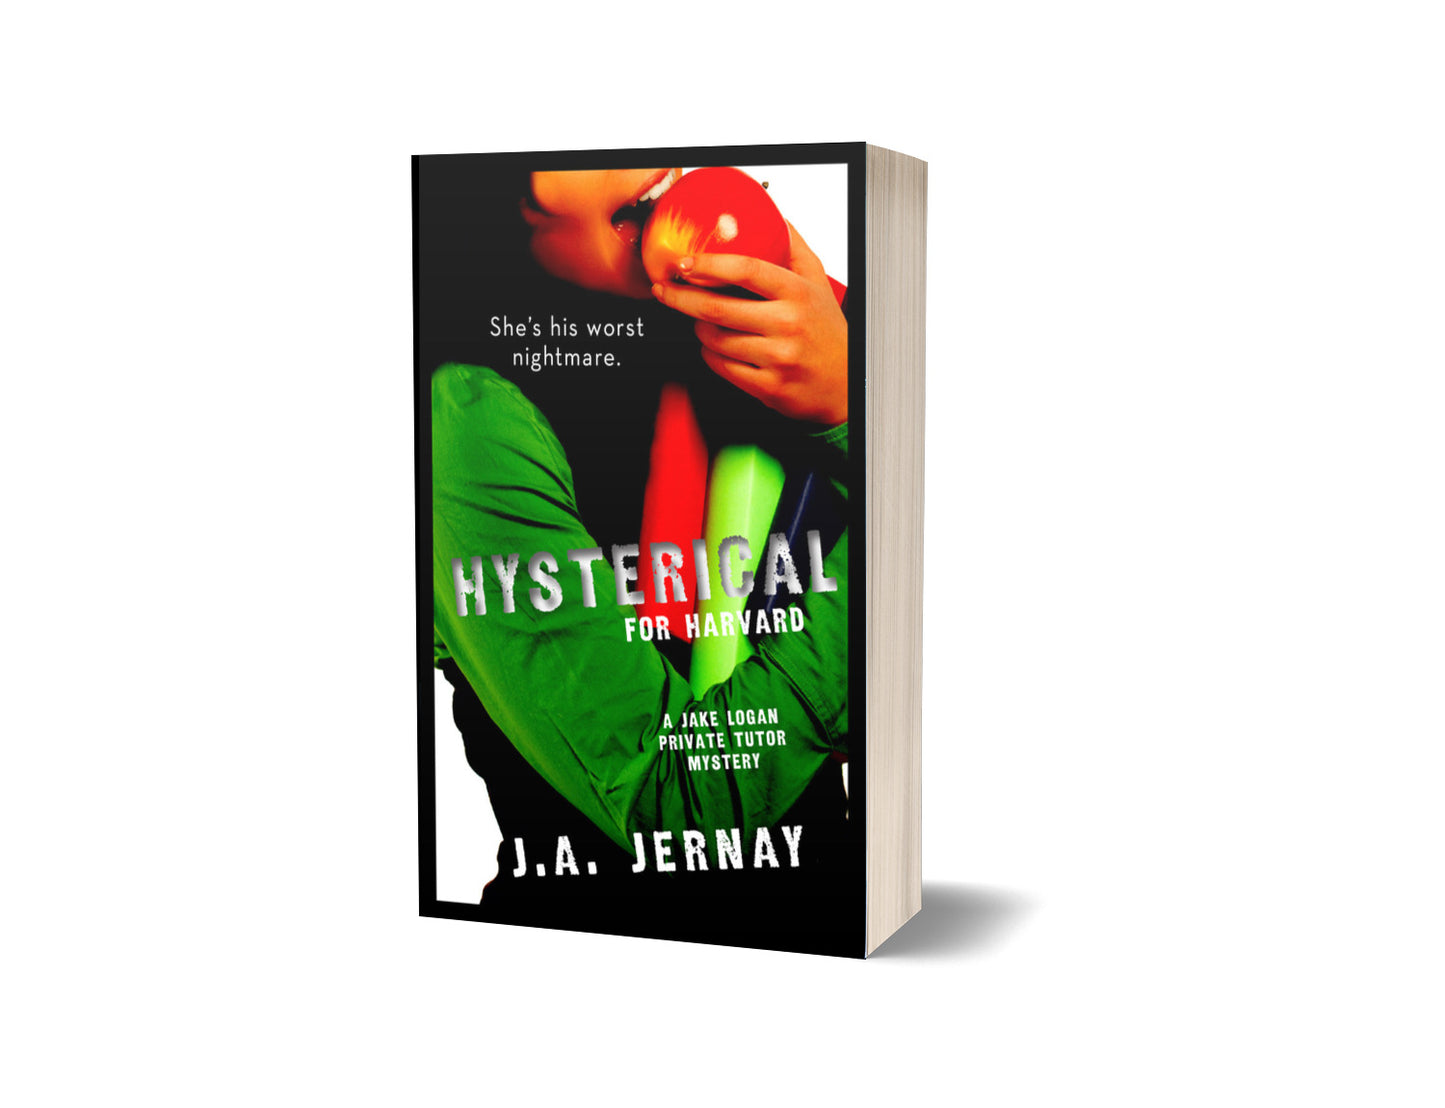 Hysterical For Harvard (A Jake Logan Private Tutor Mystery)